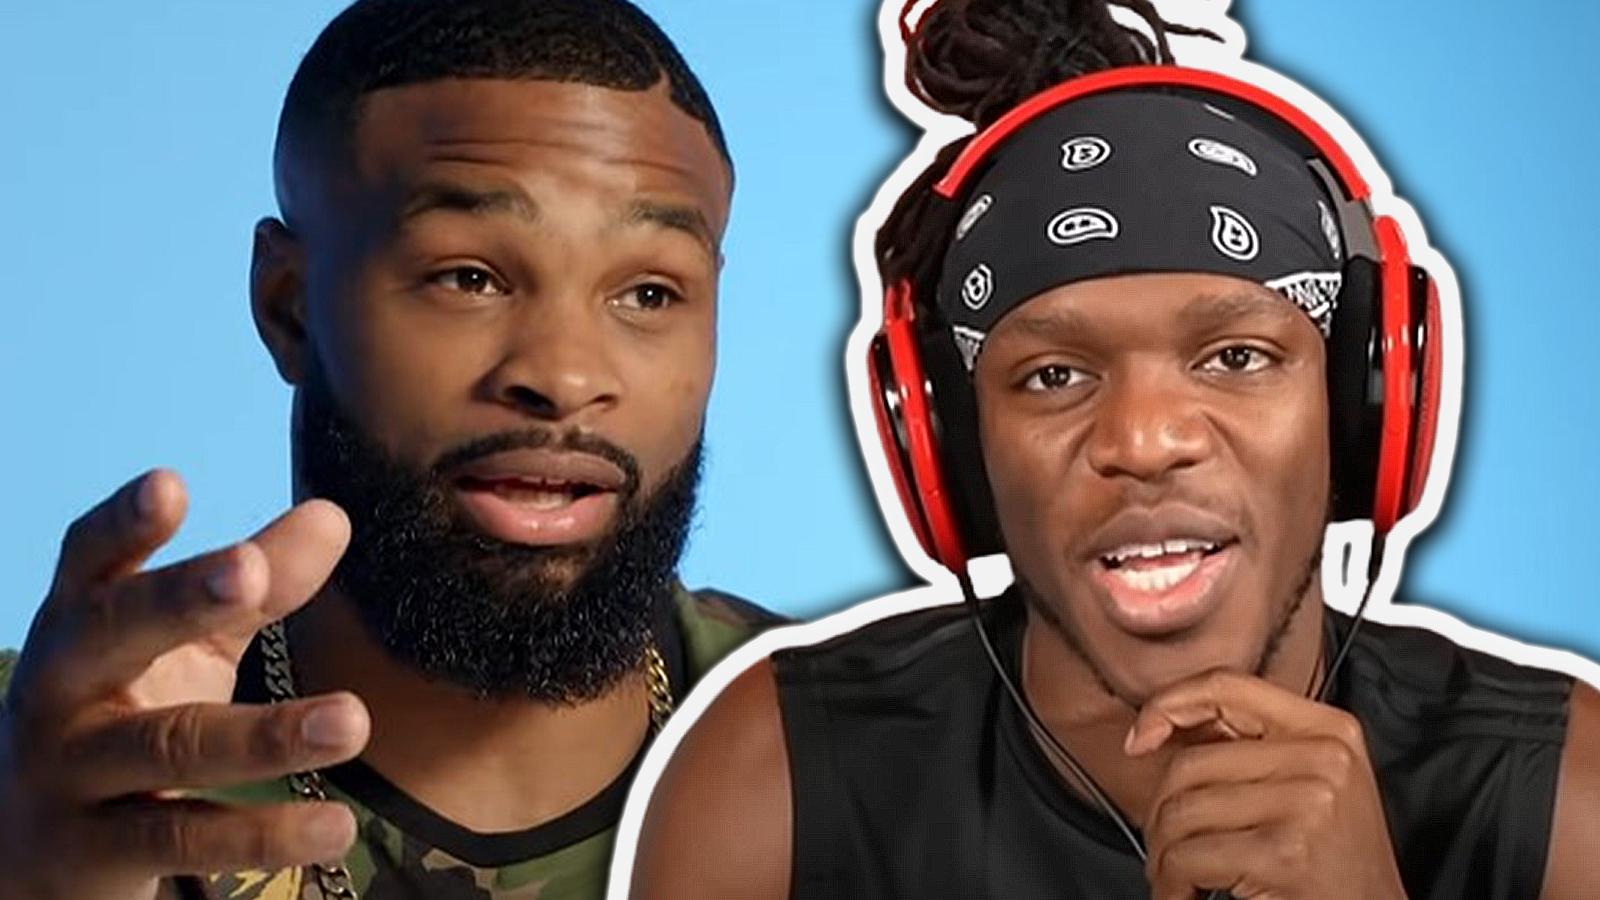 Tyron Woodley pops off on KSI for ducking fight contract